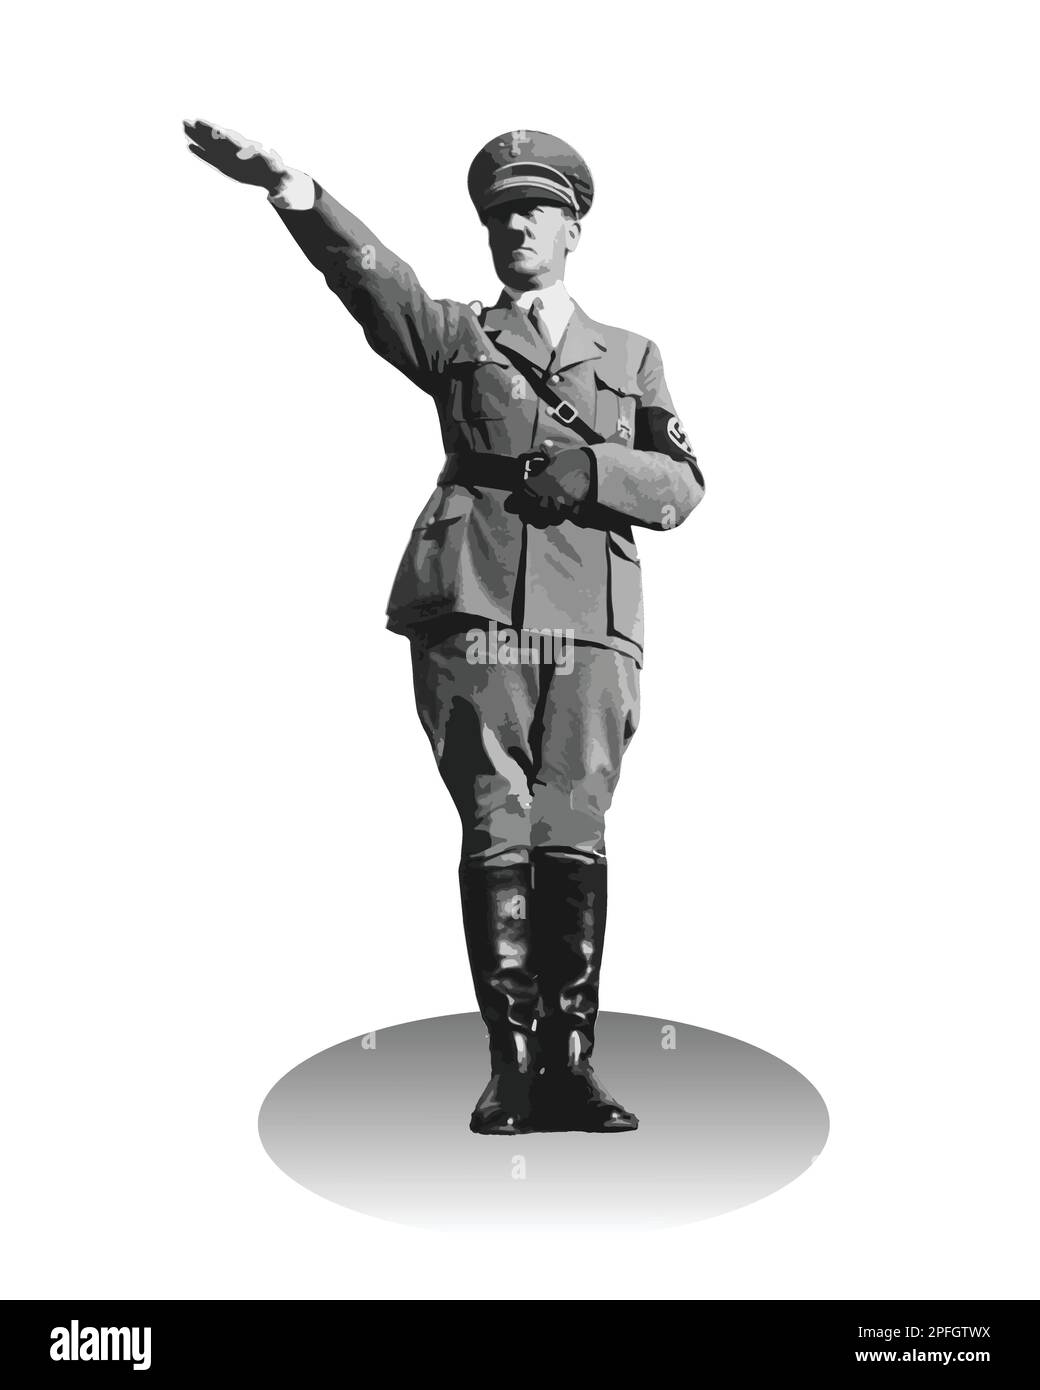 Adolf hitler looking at camera Stock Vector Images - Alamy